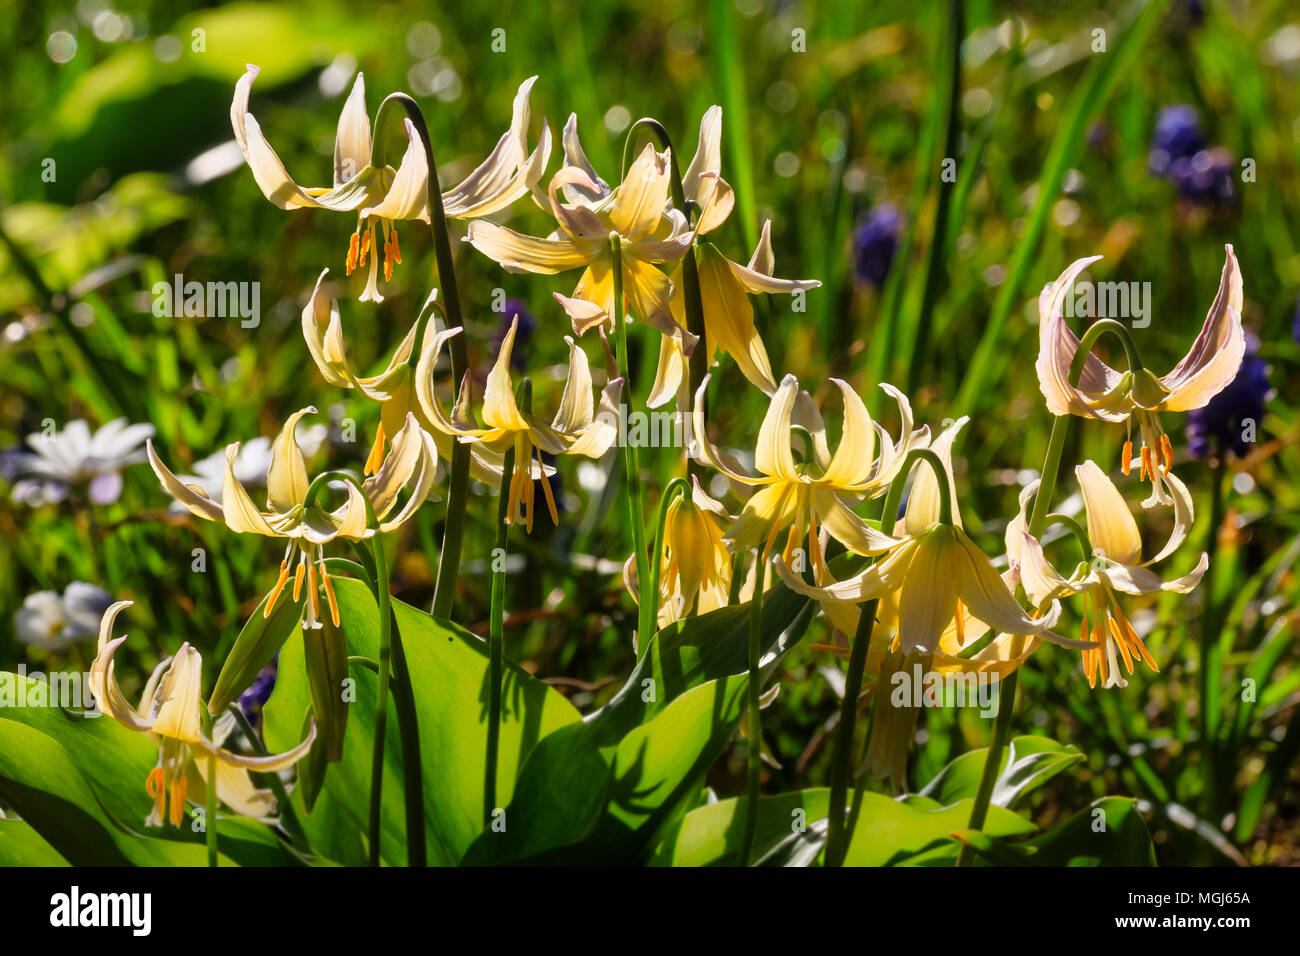 Focus stacked image of a group of the spring flowering Erythronium 'Joanna', a hybrid between E,revolutum and E.tuolumnense Stock Photo